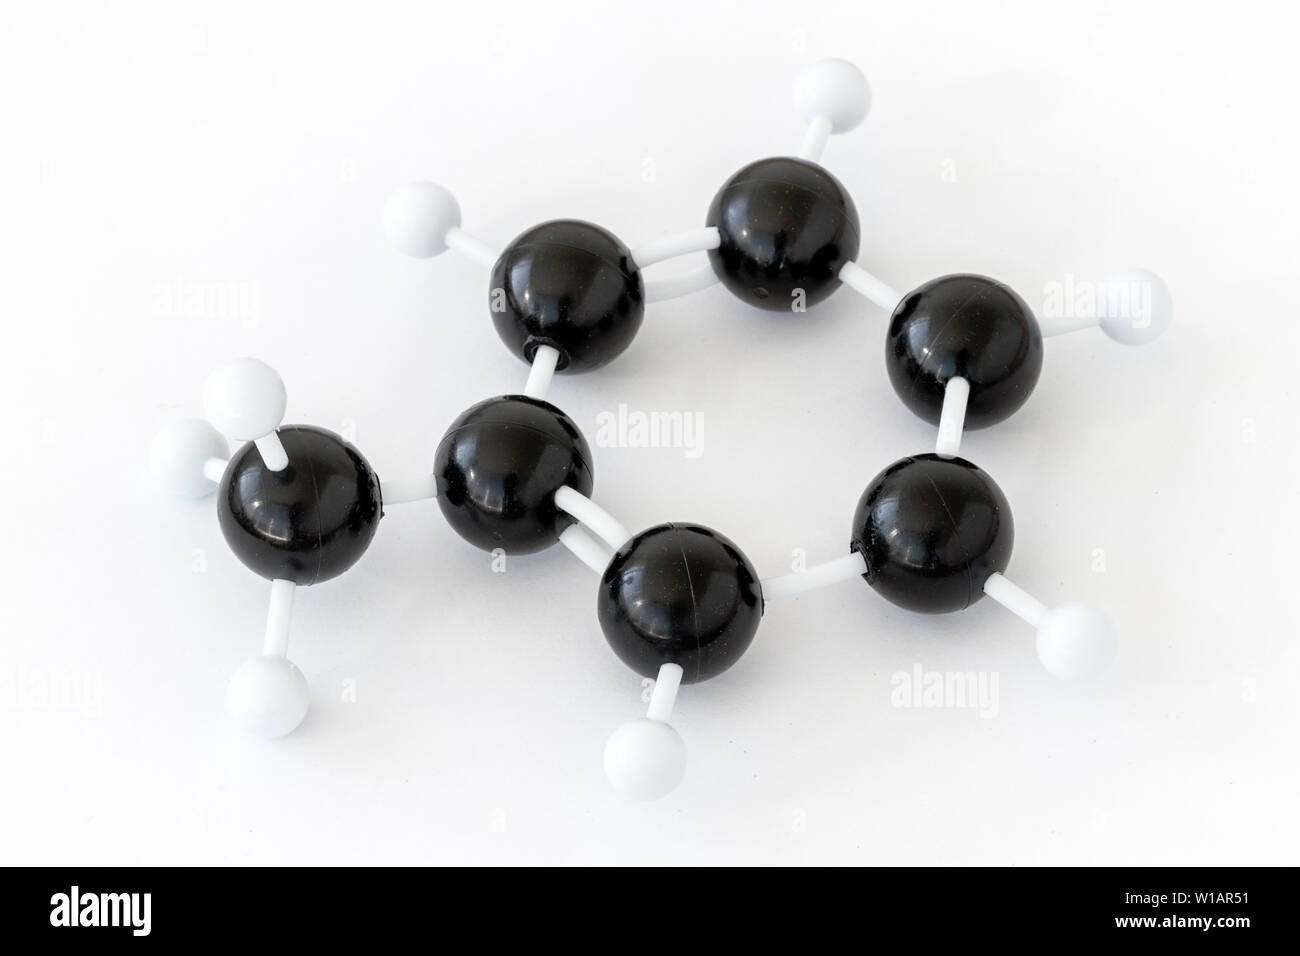 Plastic ball-and-stick model of a toluene or methylbenzene molecule (C7H8), shown with kekule structure on a white background. Methyl group left. Stock Photo